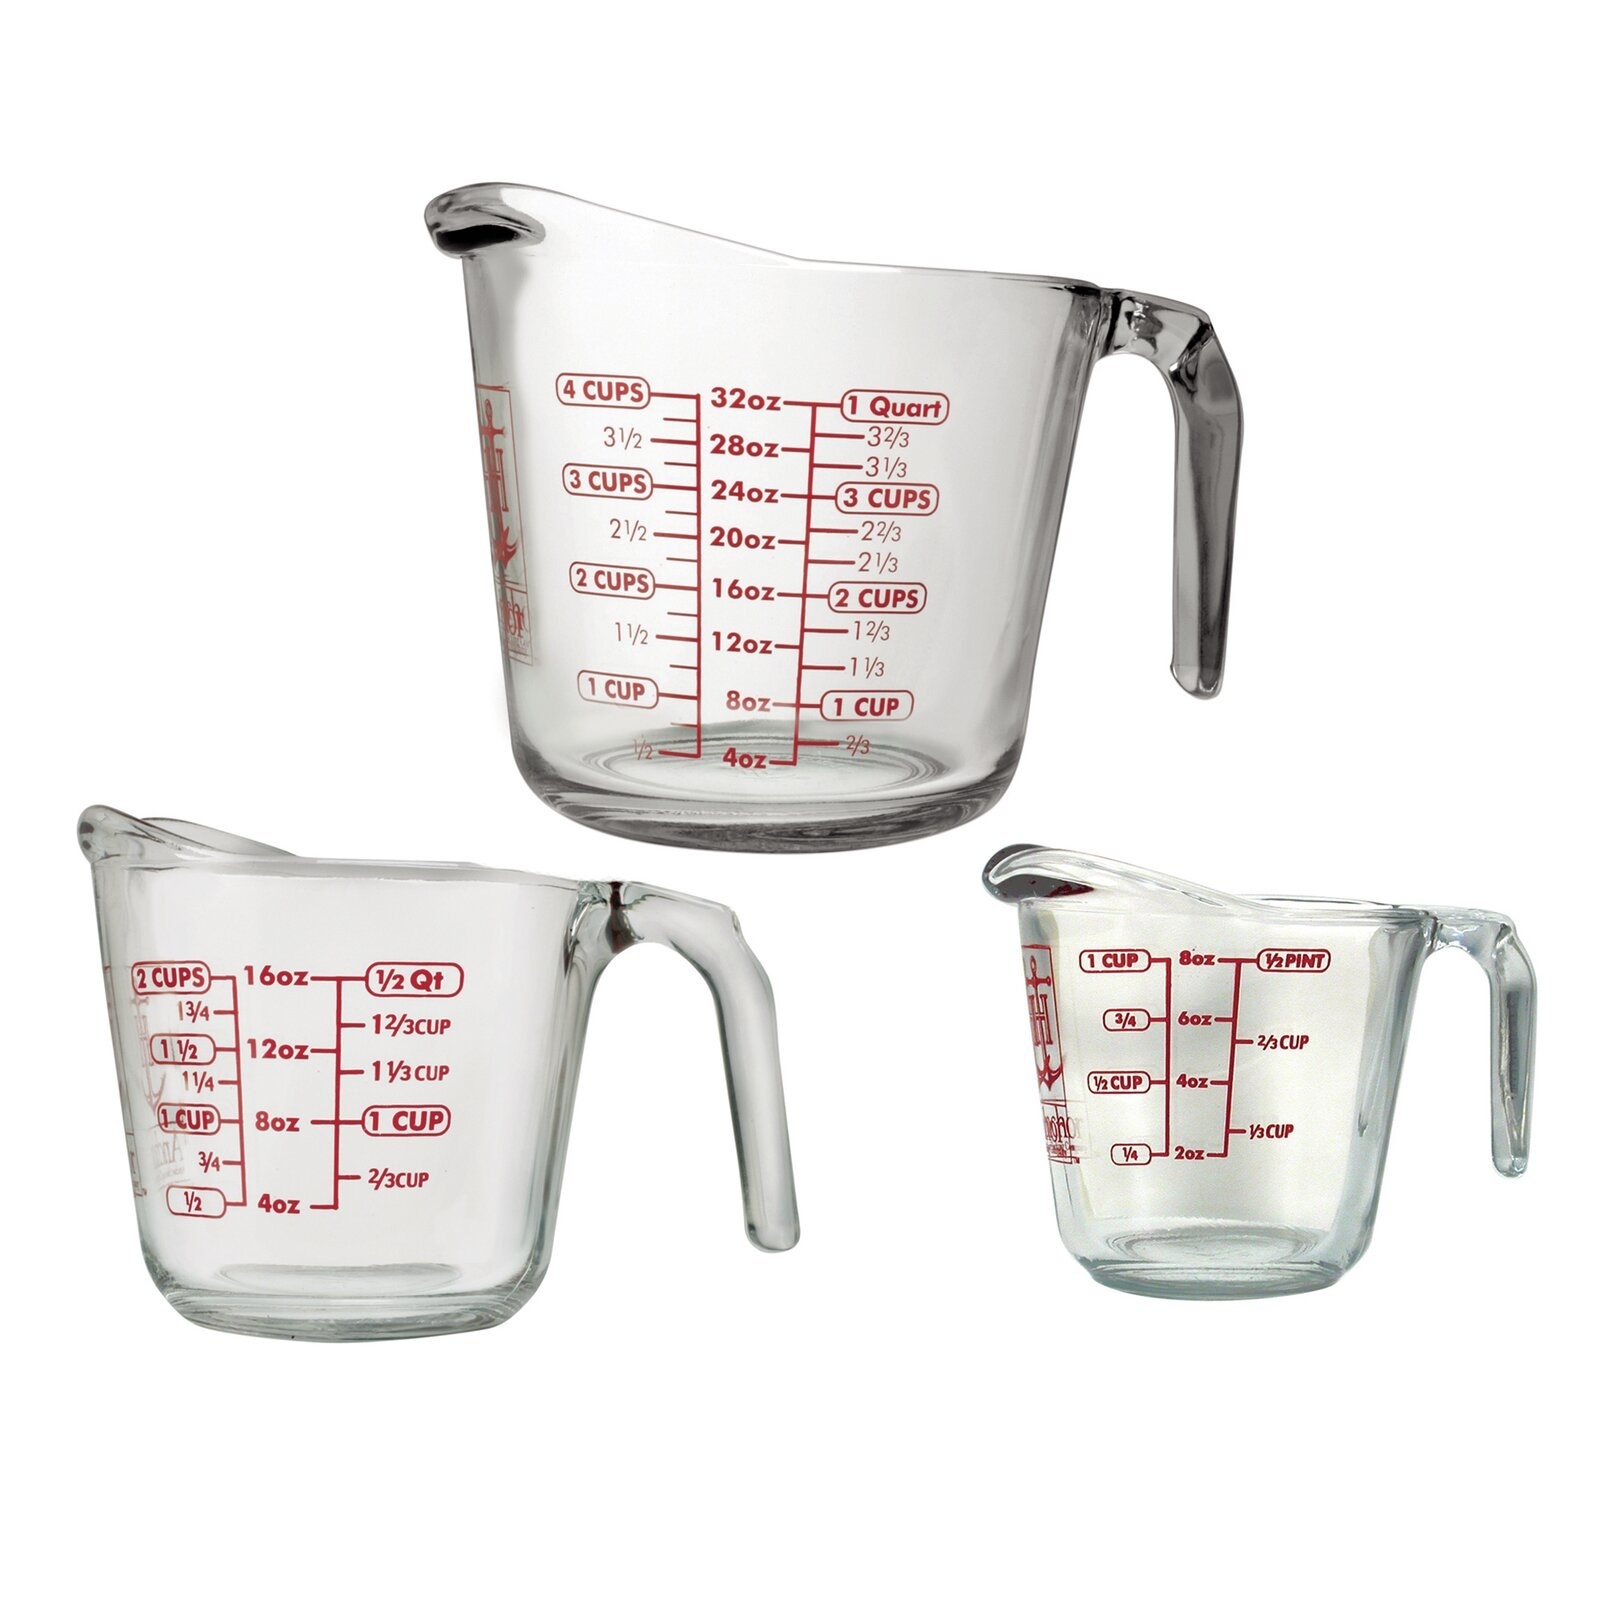 The set of measuring cups